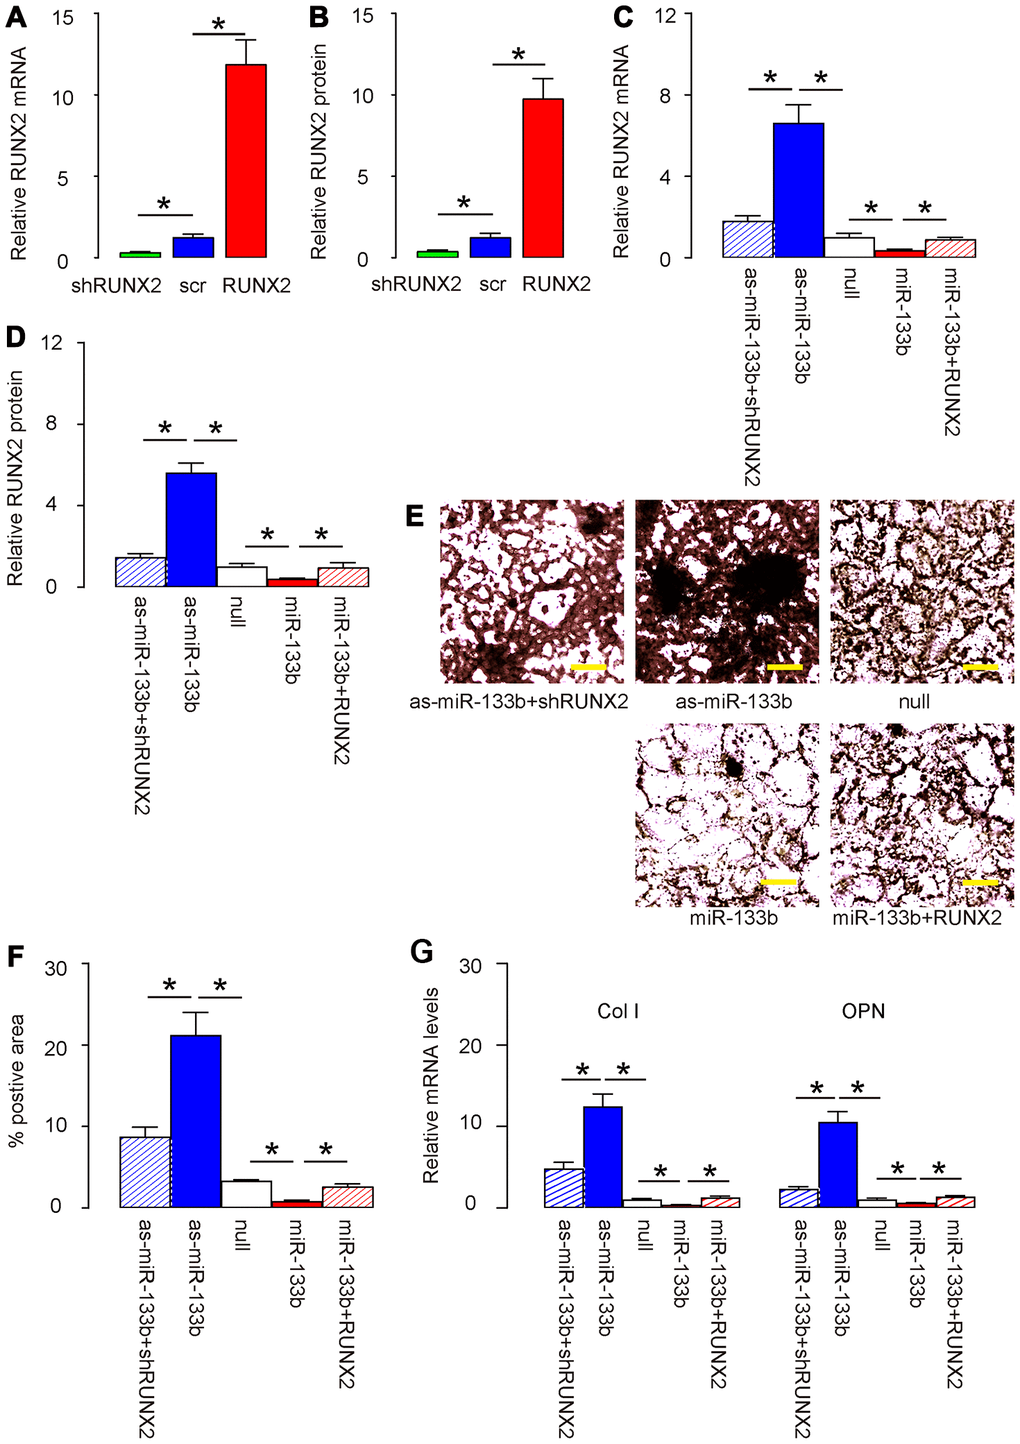 miR-133b suppresses osteogenic differentiation of AMSCs through RUNX2. (A, B) Plasmids that overexpress or deplete RUNX2 were validated by RT-qPCR (A) and by ELISA (B) for RUNX2. (C–G) AMSCs were transfected with either miR-133b or as-miR-133b, compared to null controls. In another two groups, AMSCs were co-transfected with miR-133b and RUNX2 or with as-miR-133b and shRUNX2. (C, D) RT-qPCR (C) and ELISA (D) for RUNX2. (E, F) Osteogenic differentiation of AMSCs was determined by Von kossa staining, shown by representative images (E) and by quantification (F). (G) RT-qPCR for osteogenesis-associated genes, collagen I (Col I) and osteopontin (OPN). N=5. *p